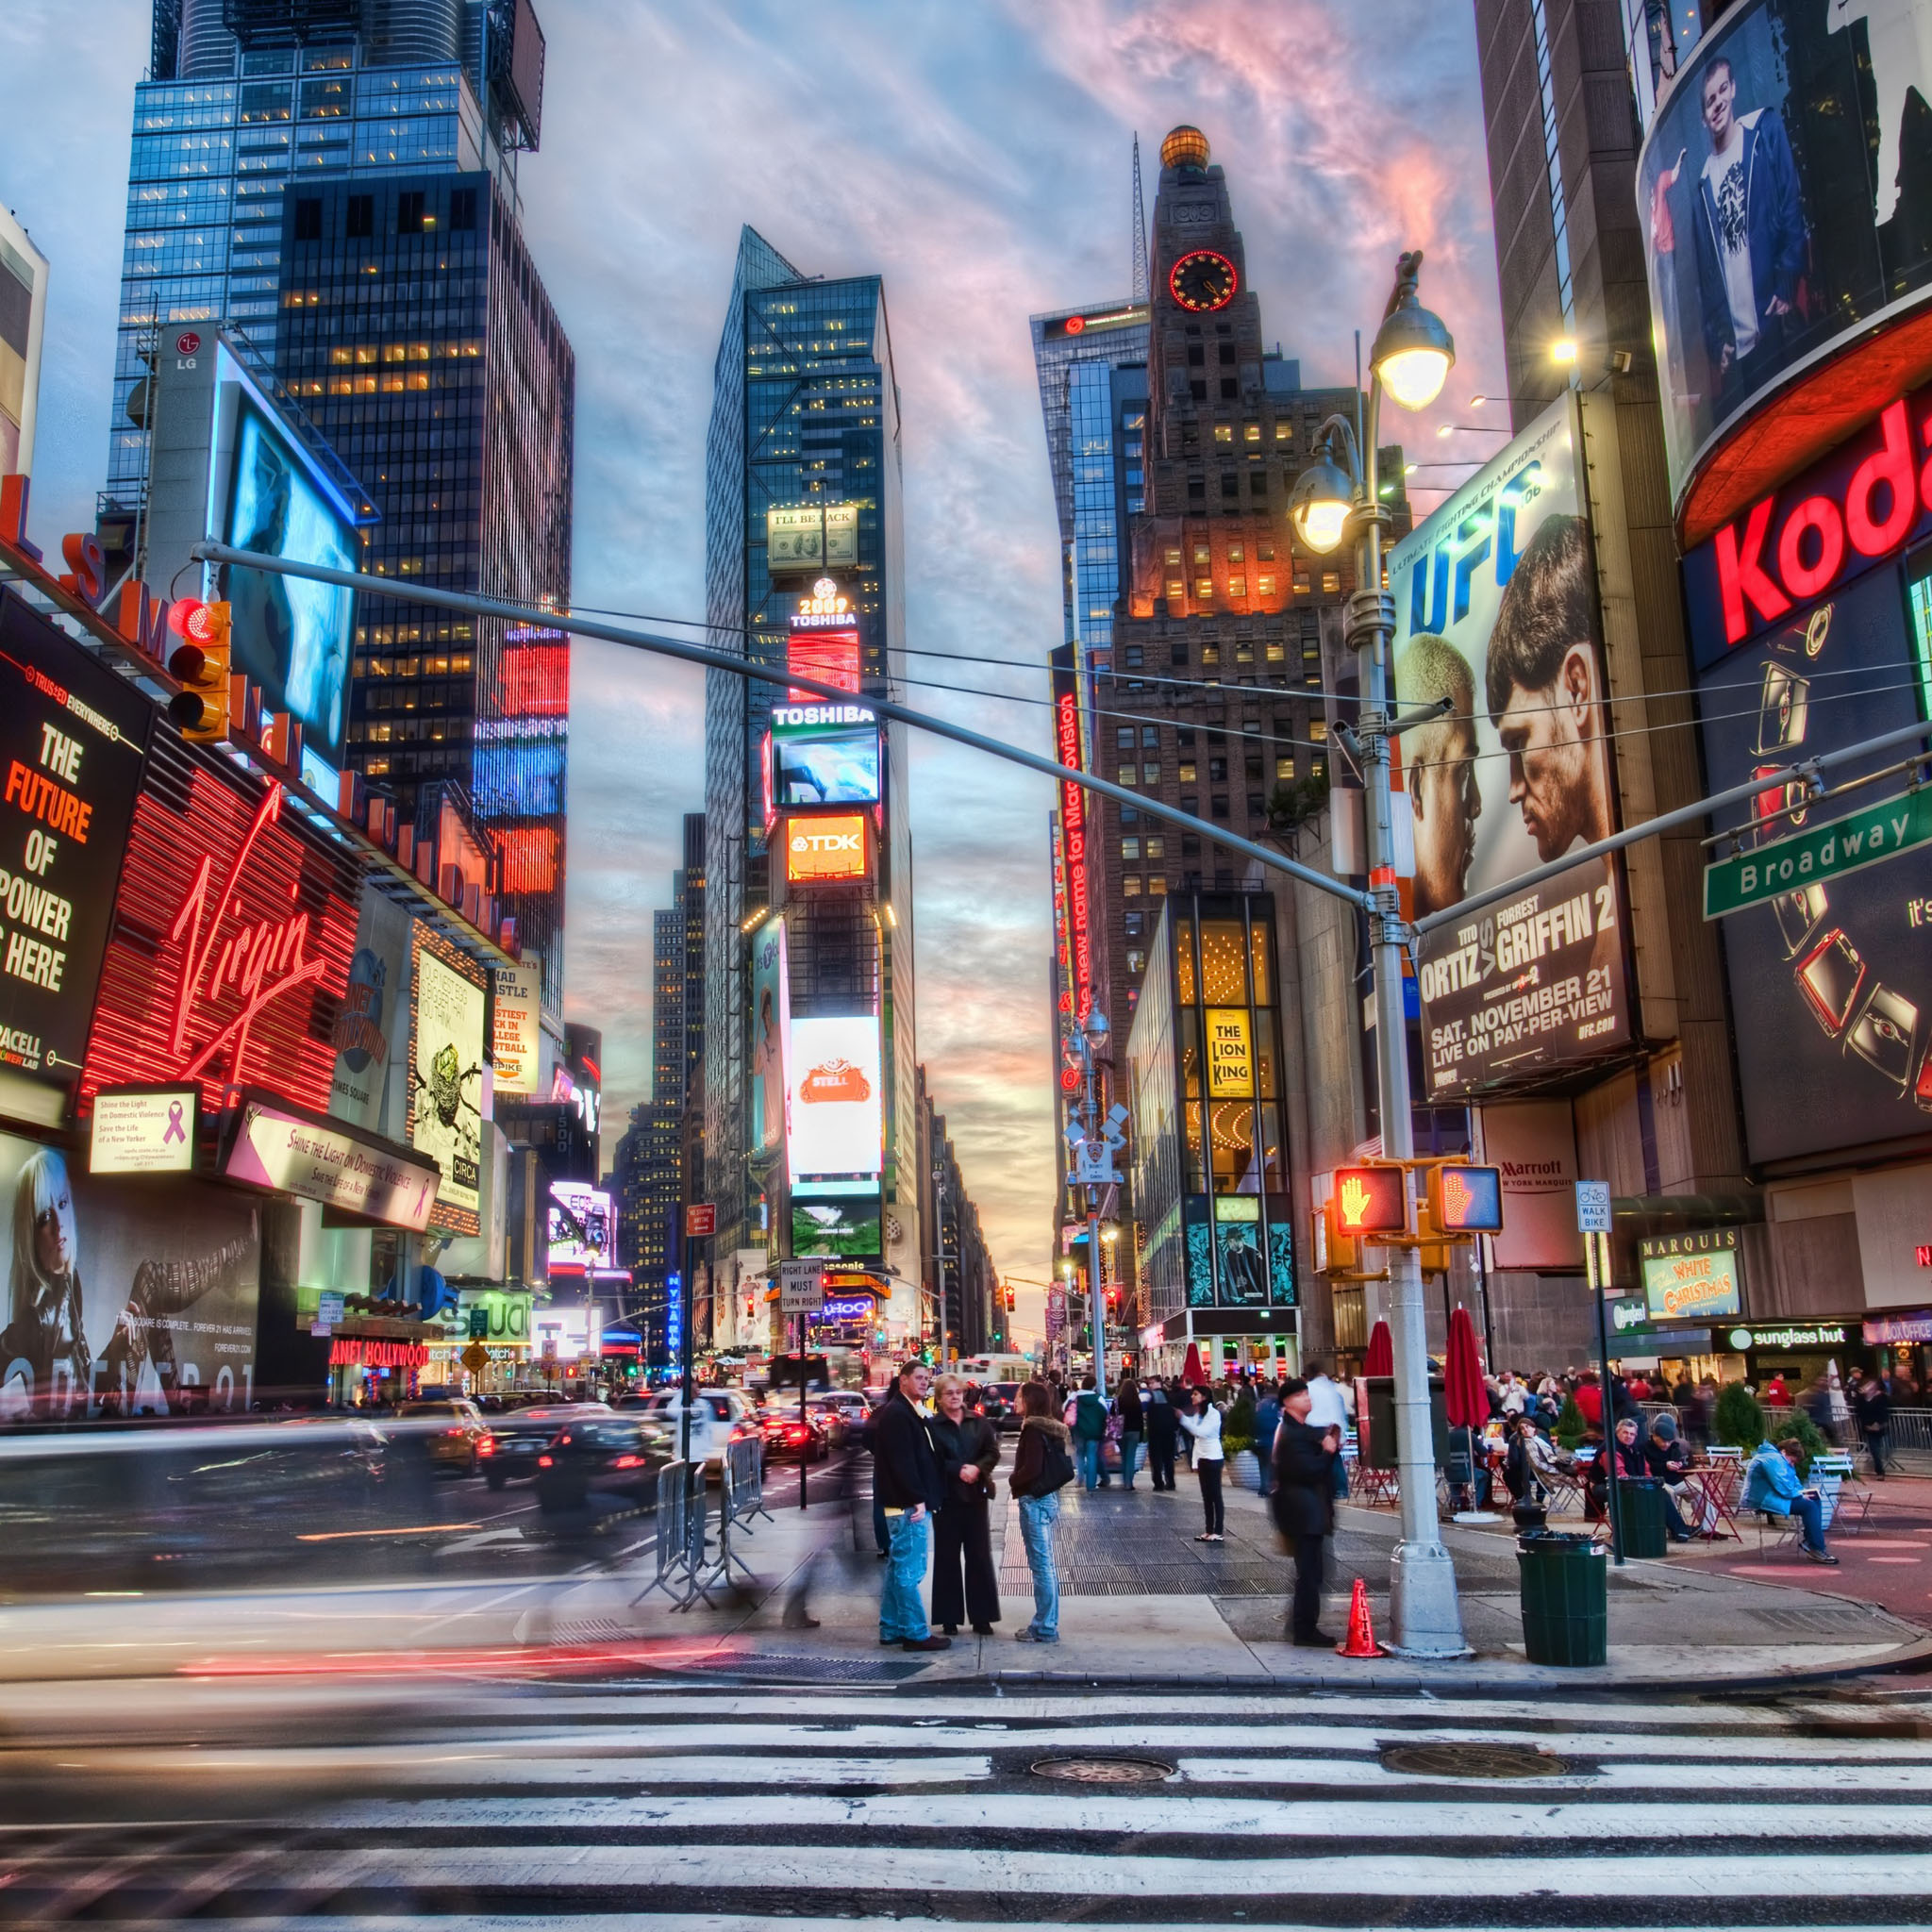 New York, New York For The Ipad - Times Square - HD Wallpaper 